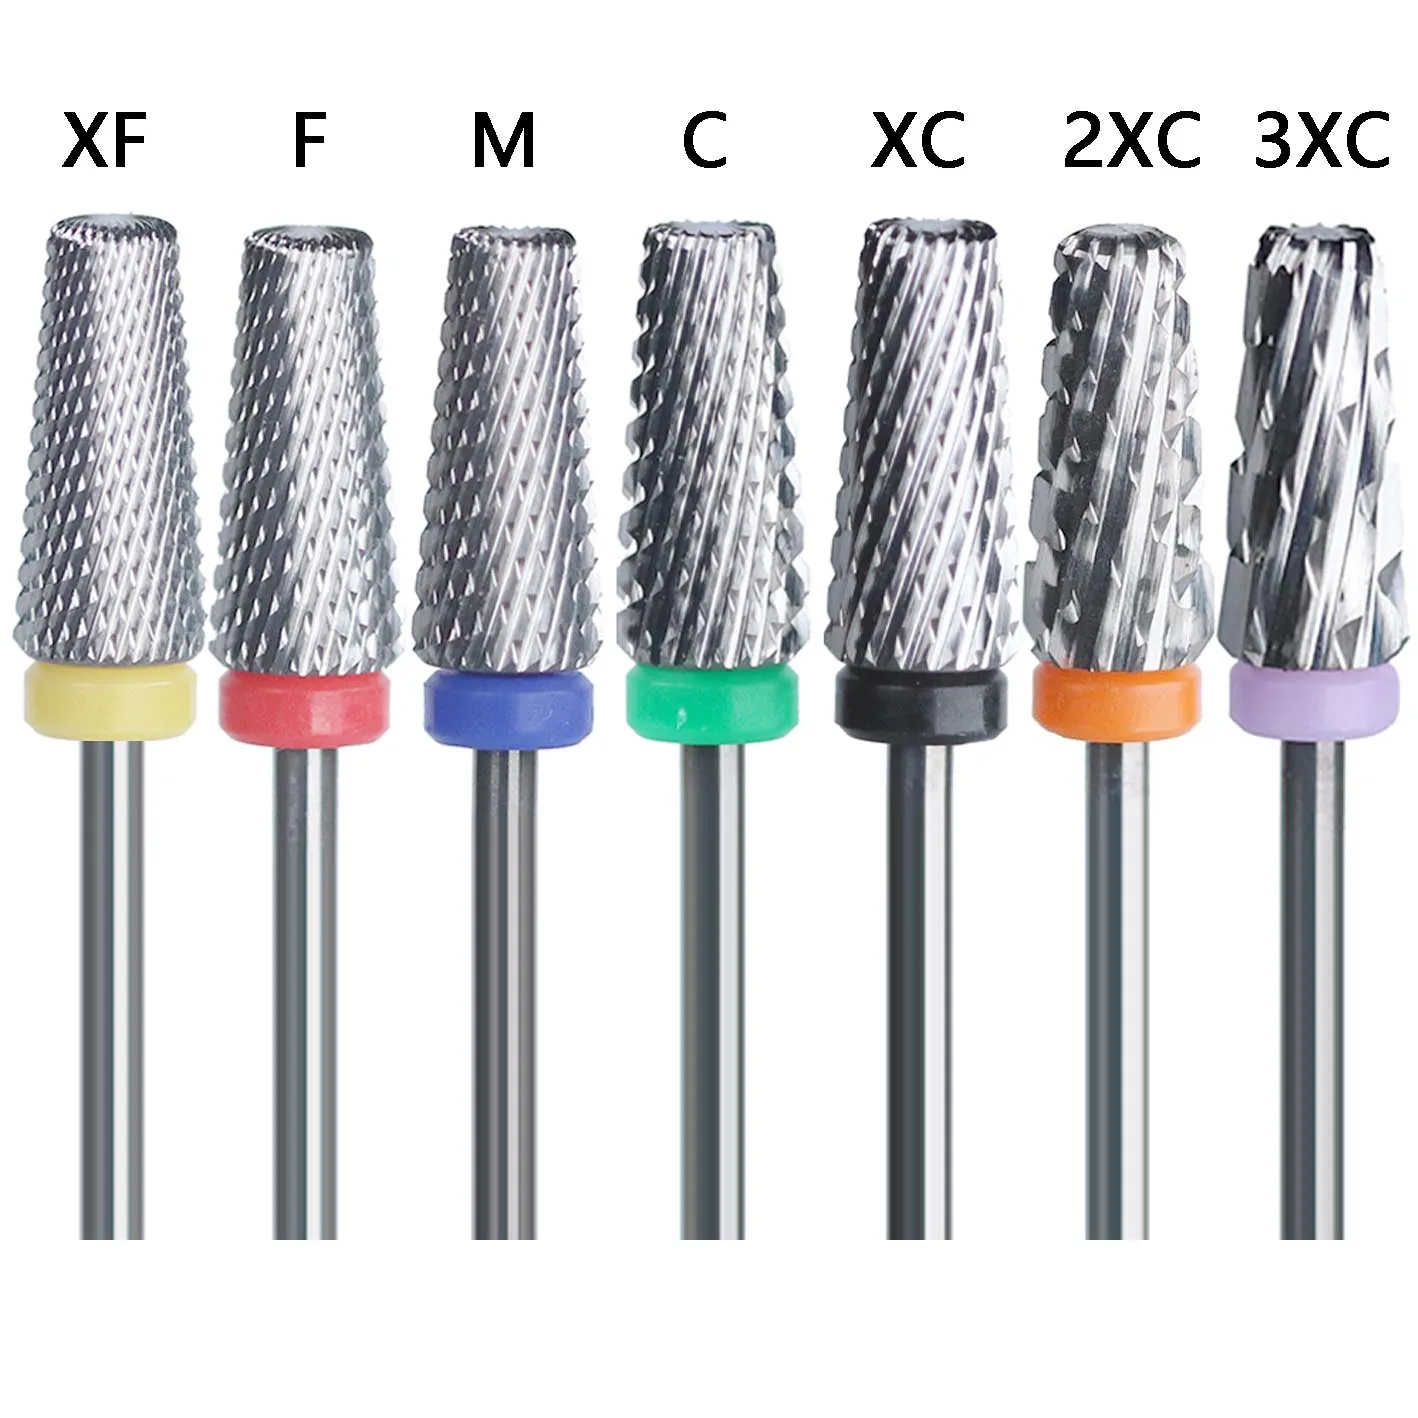 5PCS/Bag 5 IN 1 Tapered Carbide Nail Drill Bits With Cut 3/32